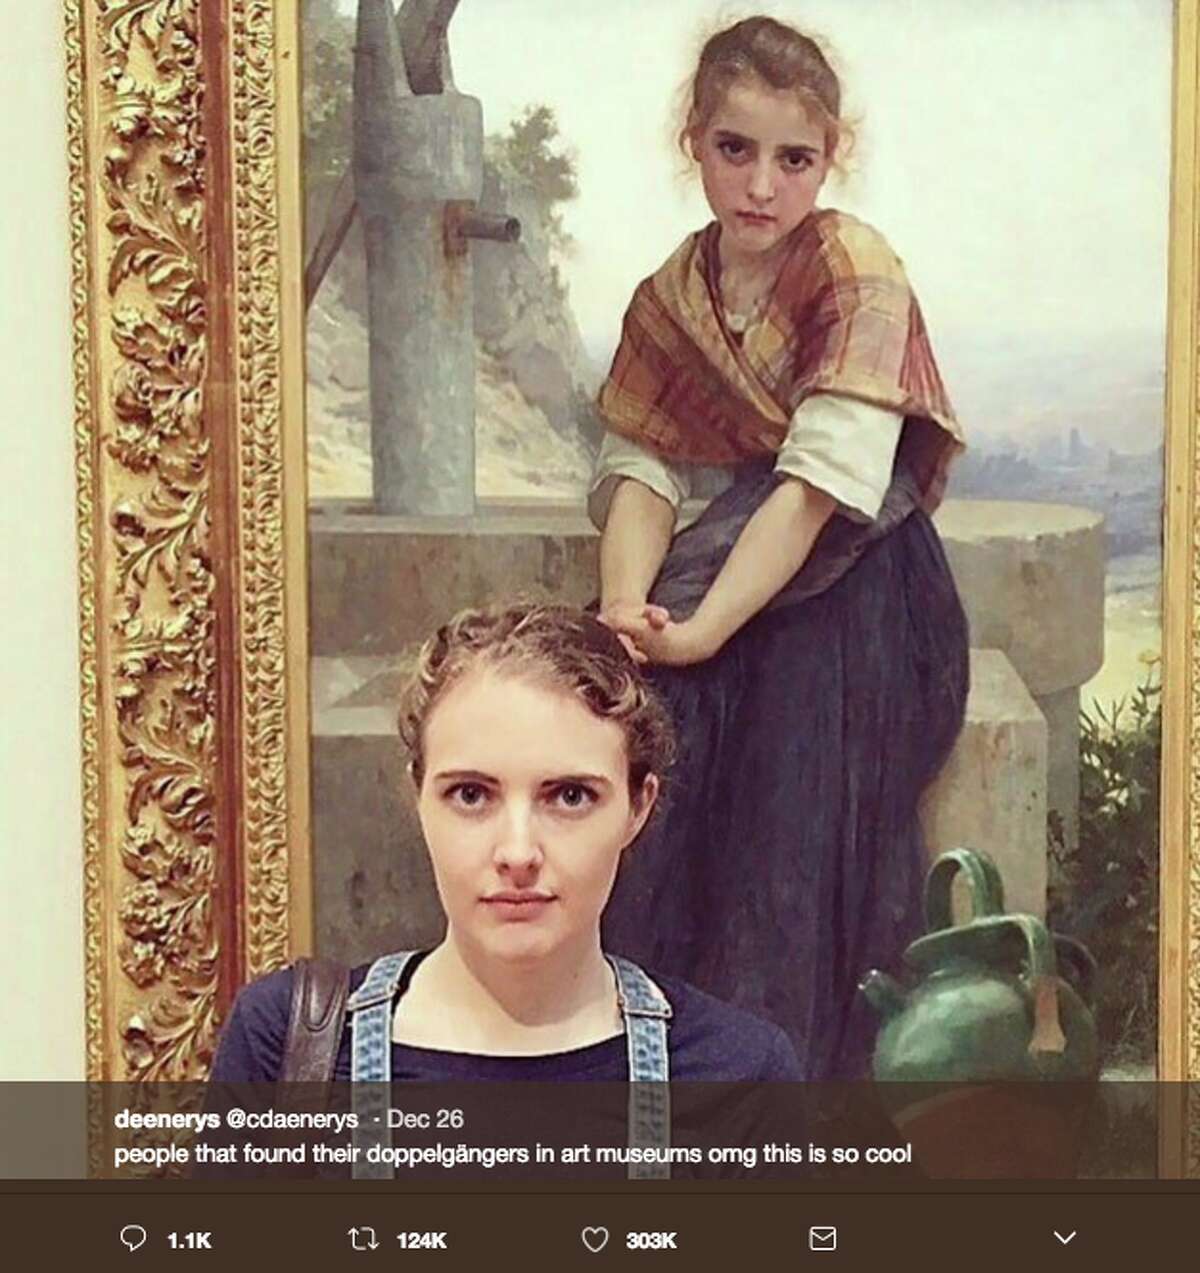 People found their doppelgangers in art museums and shared the uncanny resemblances on Twitter.